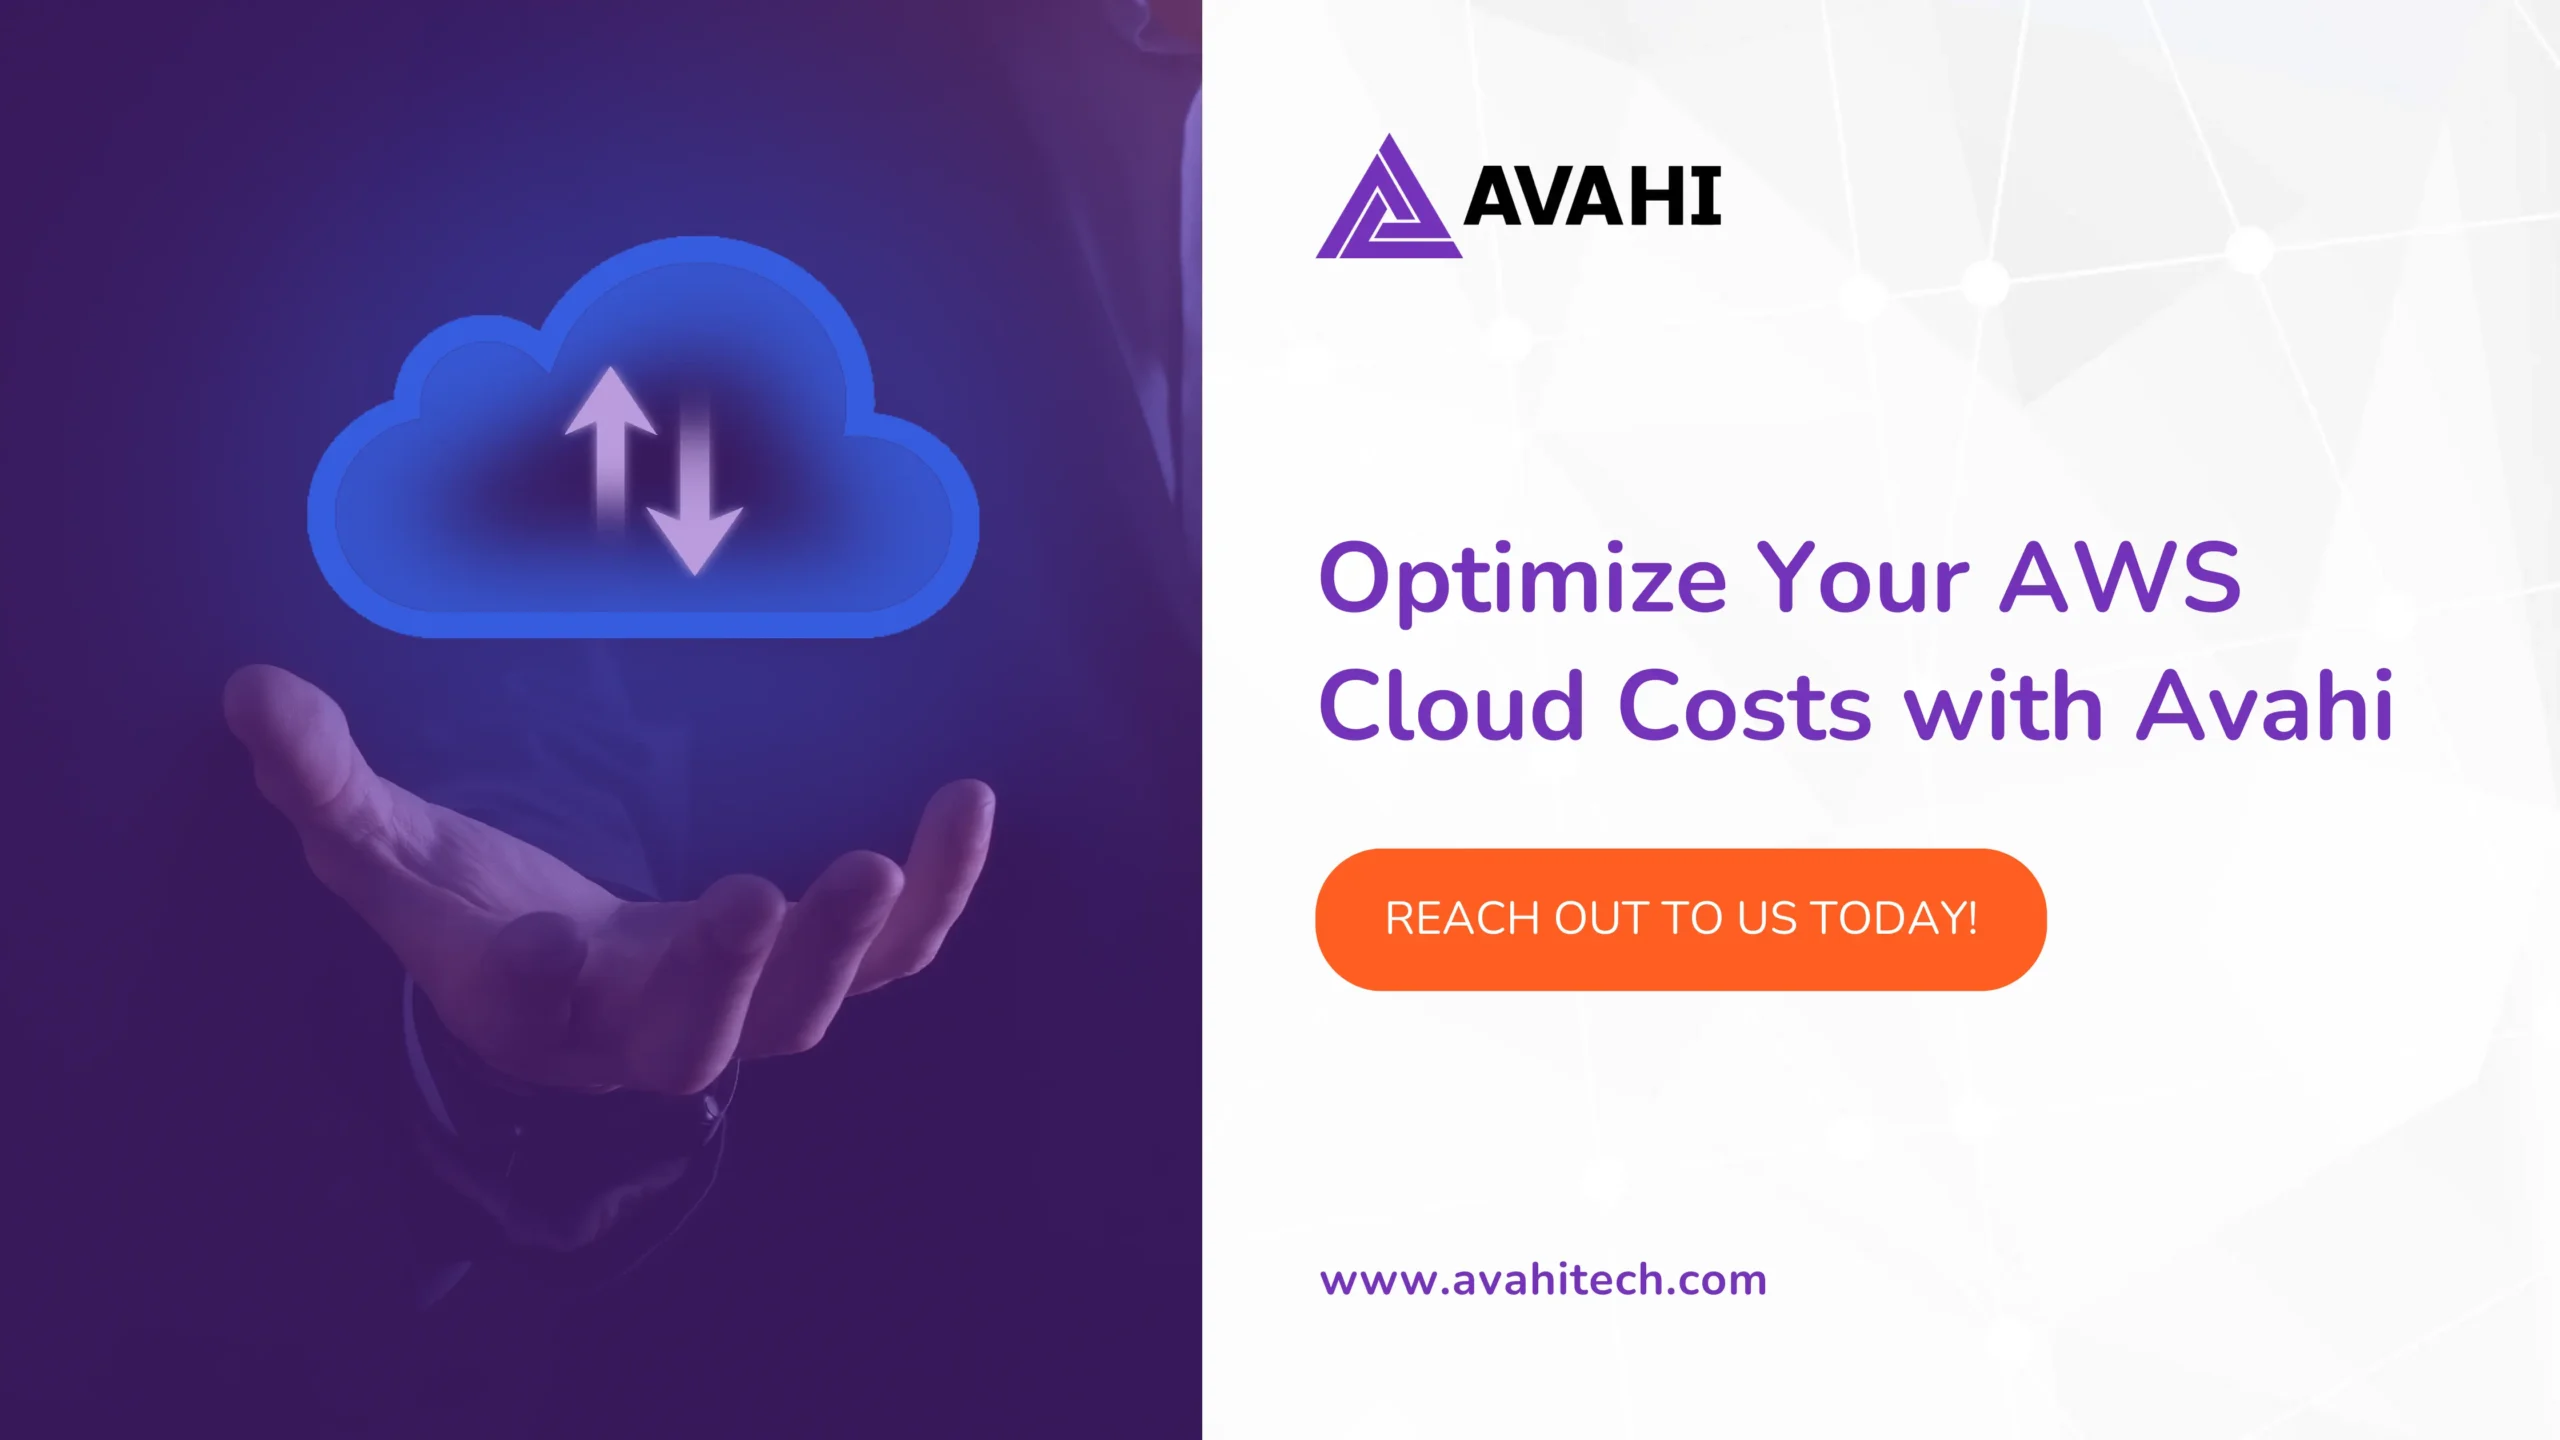 Optimize Your AWS Cloud Costs with Avahi